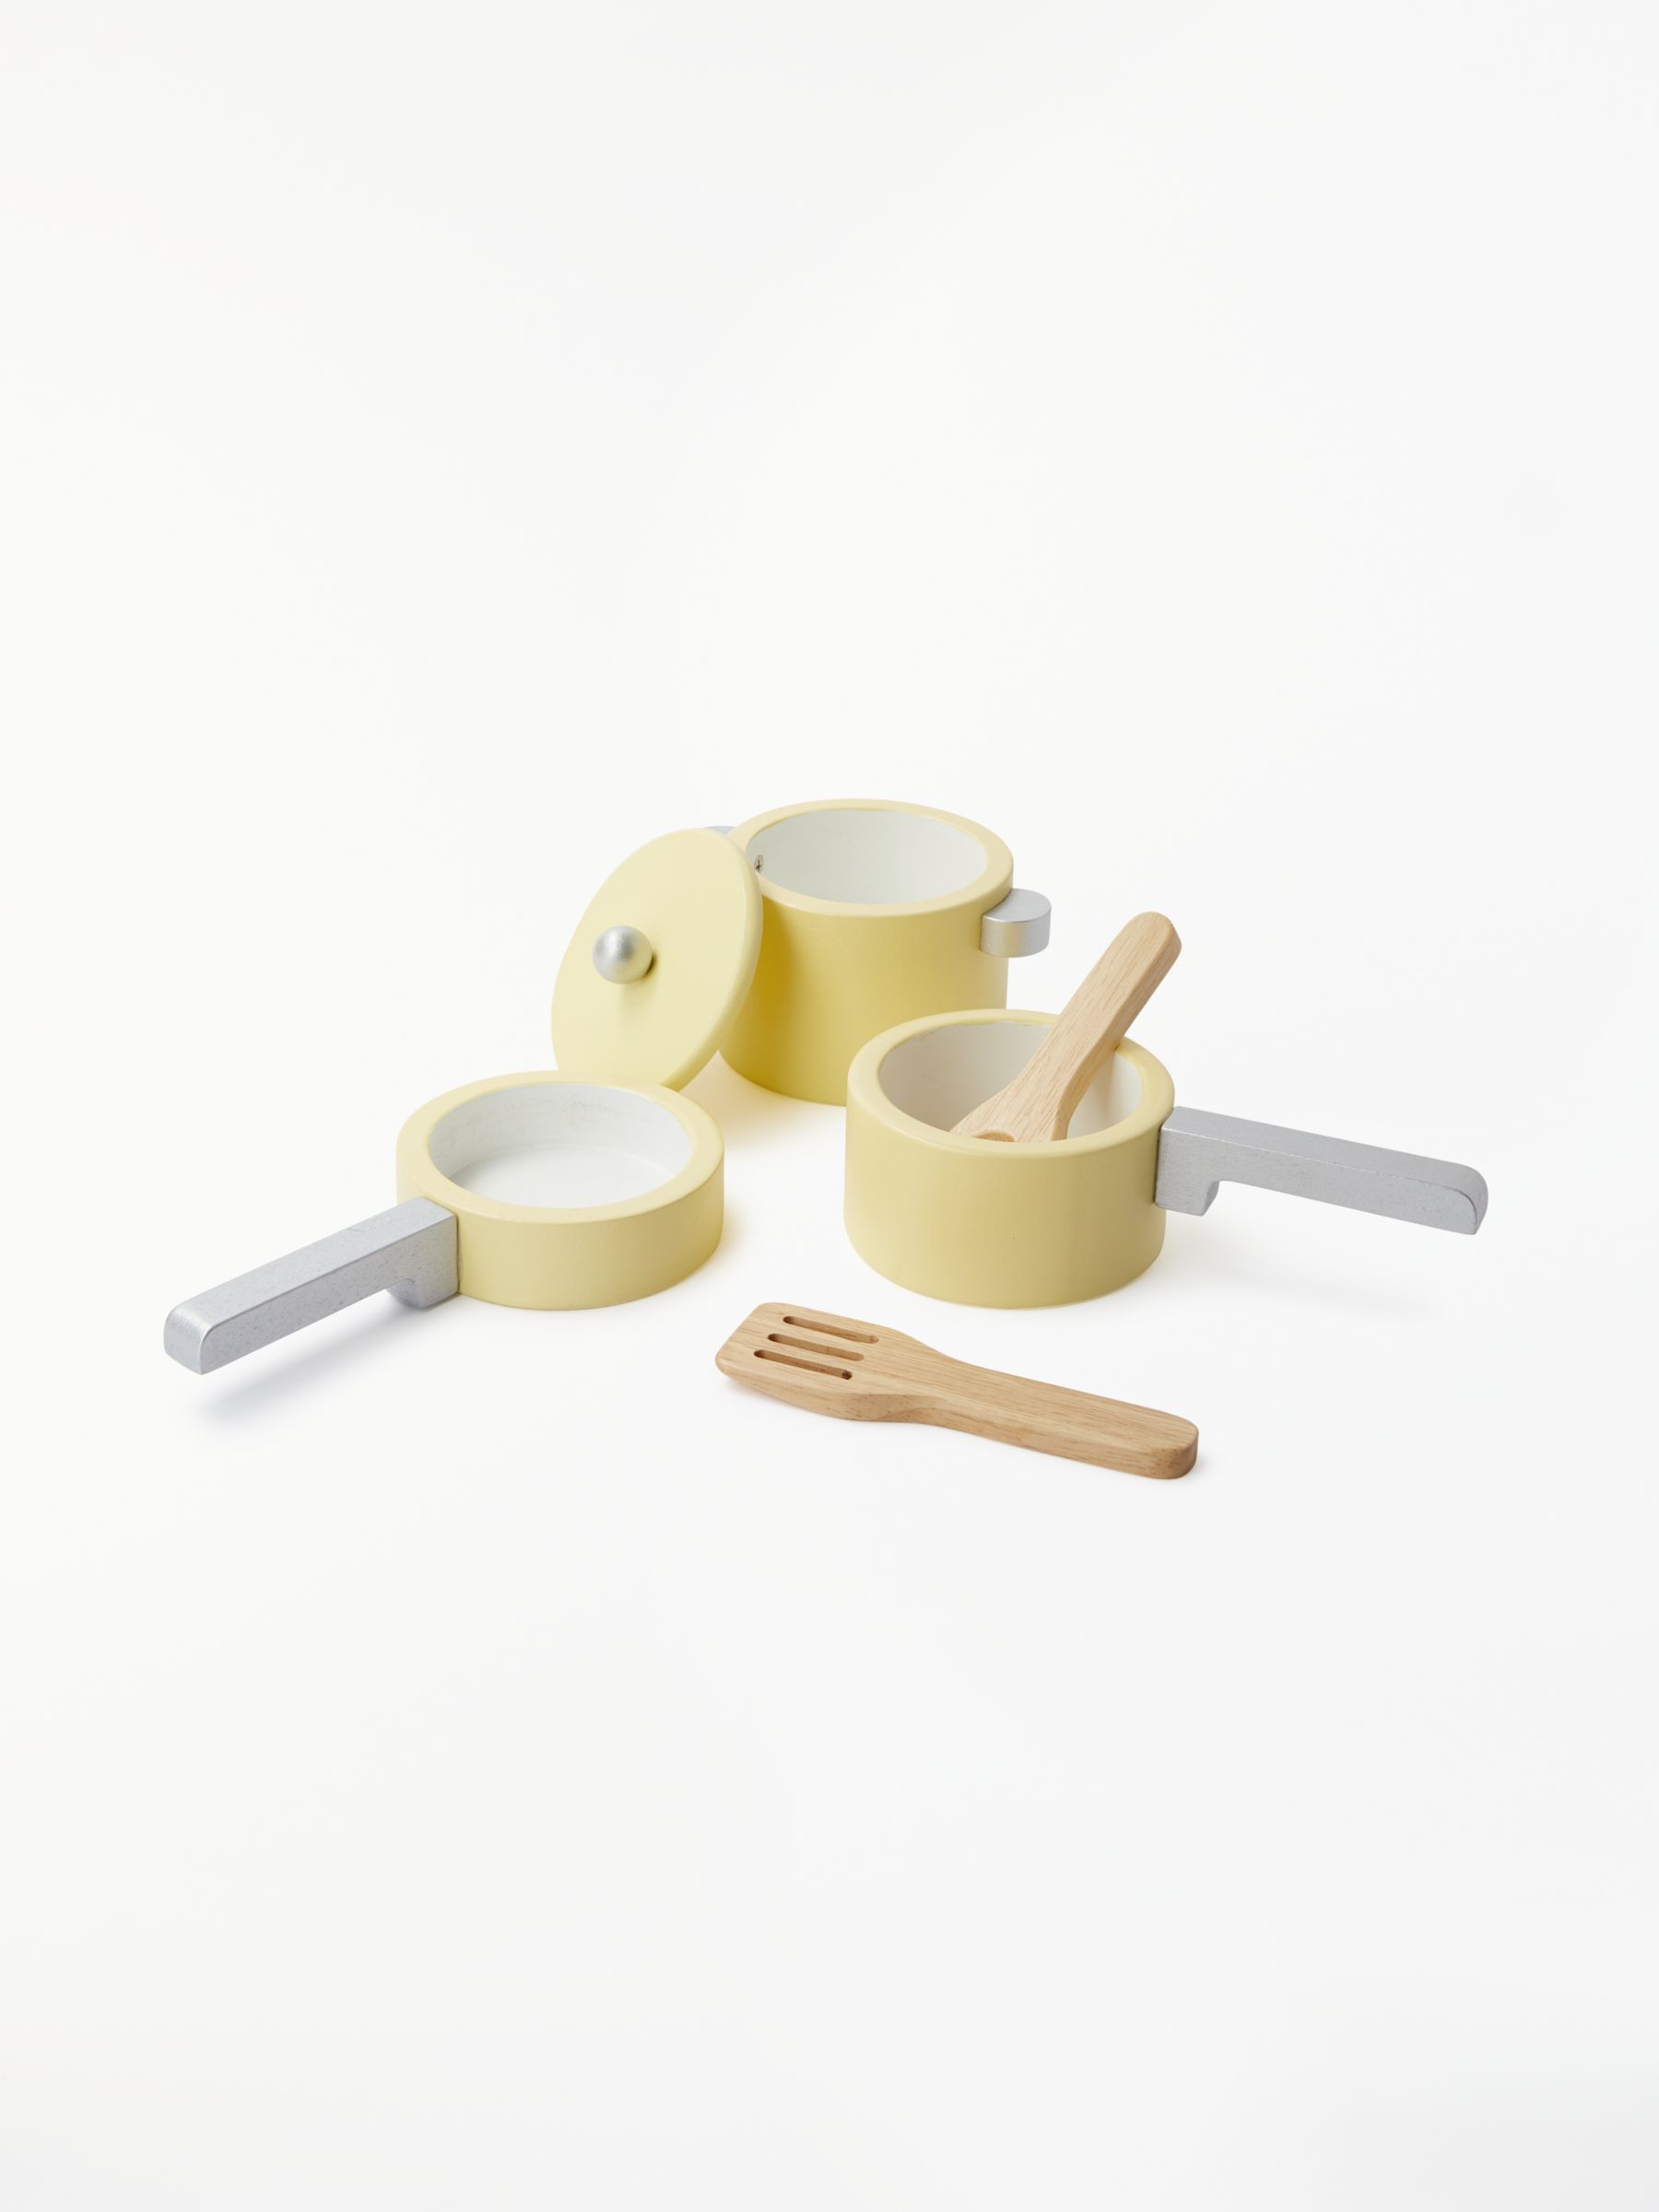 wooden toy pans